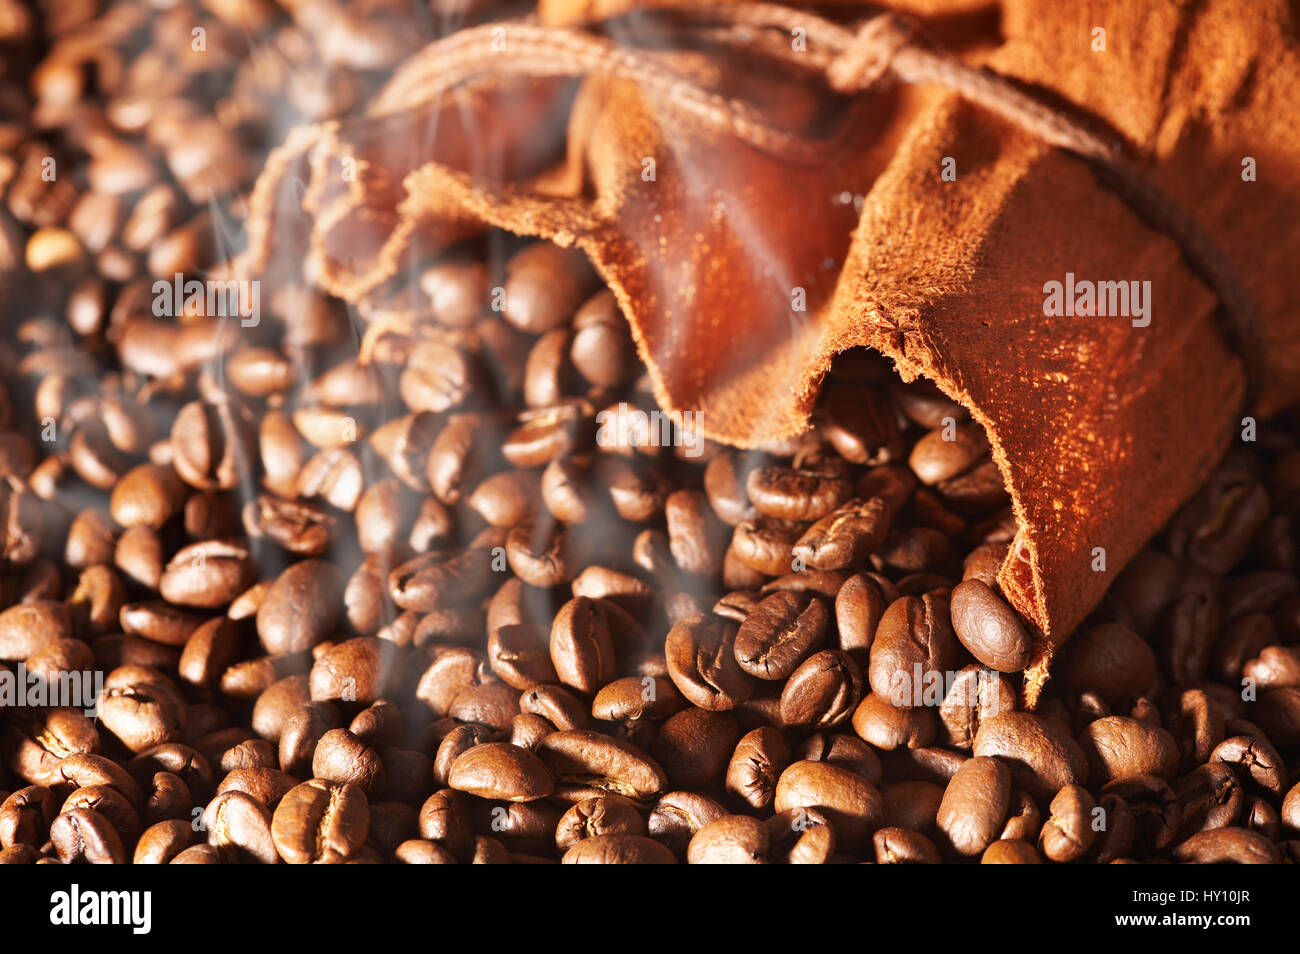 Bag of coffee and coffee-beans Stock Photo